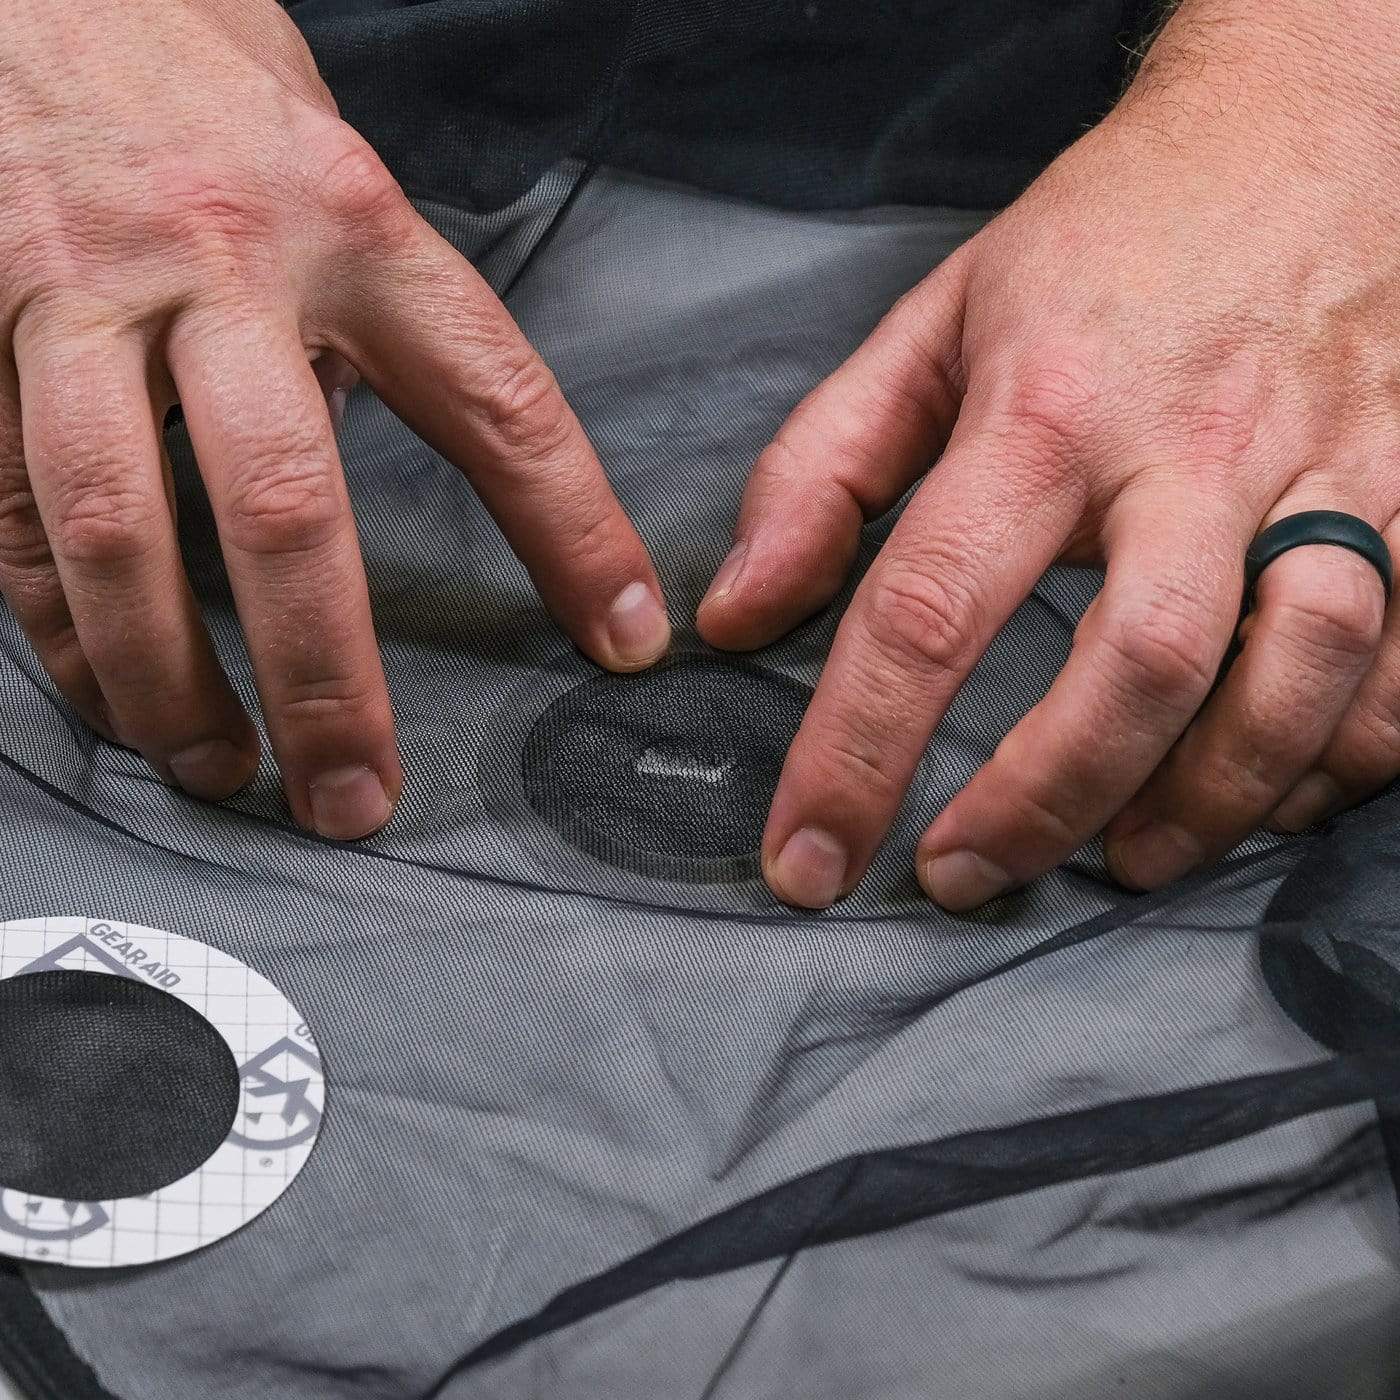 Close-up of a person's hands patching a hole in gray fabric with a Hummingbird Hammocks Tenacious Tape Mesh Patch.